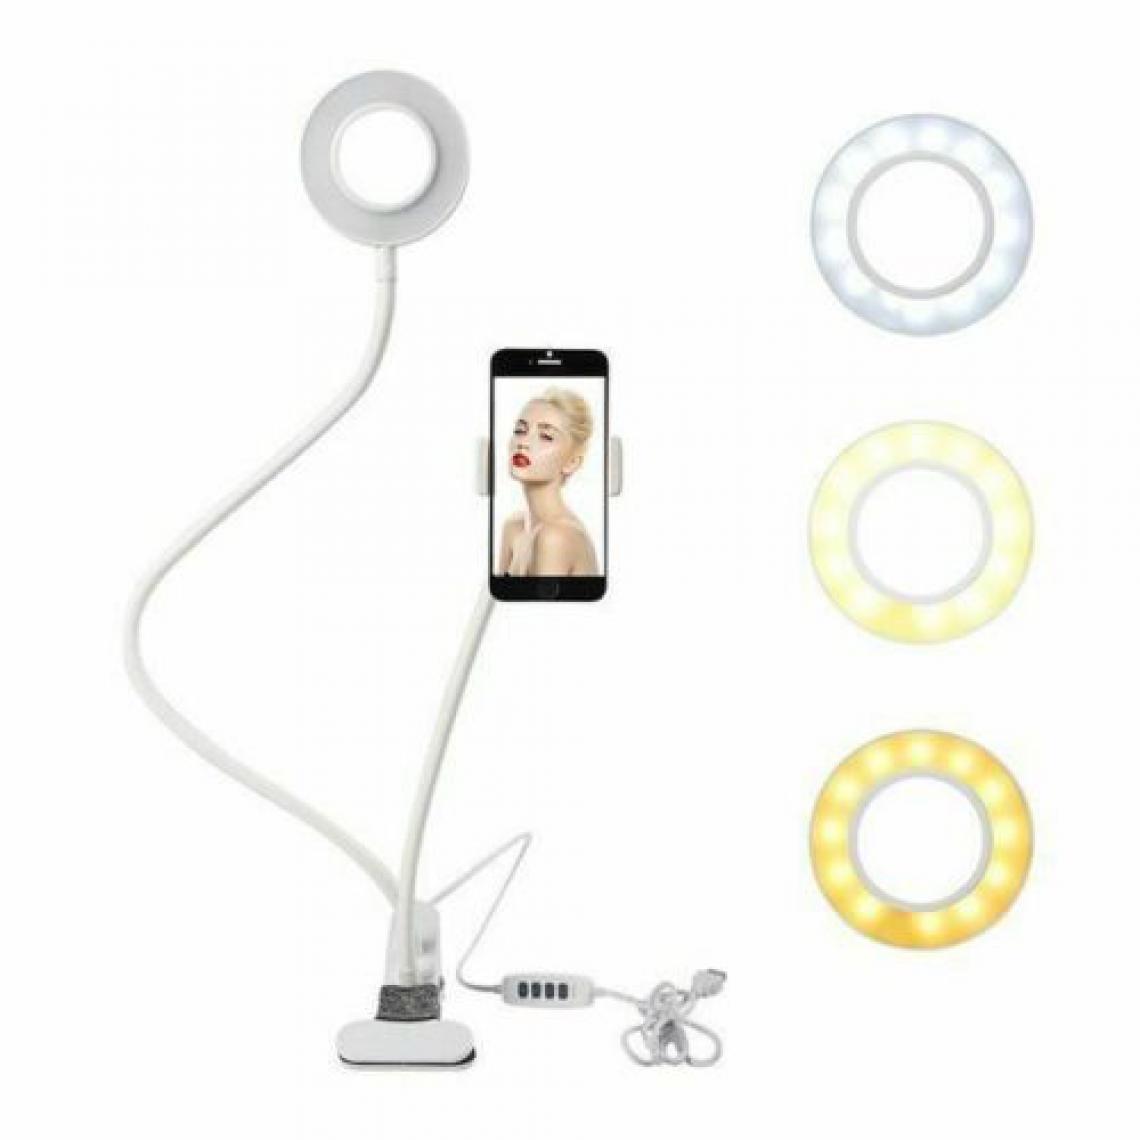 Ozzzo - Stand support bureau selfie led ozzzo blanc pour SAMSUNG G870 Galaxy S5 Active - Station d'accueil smartphone